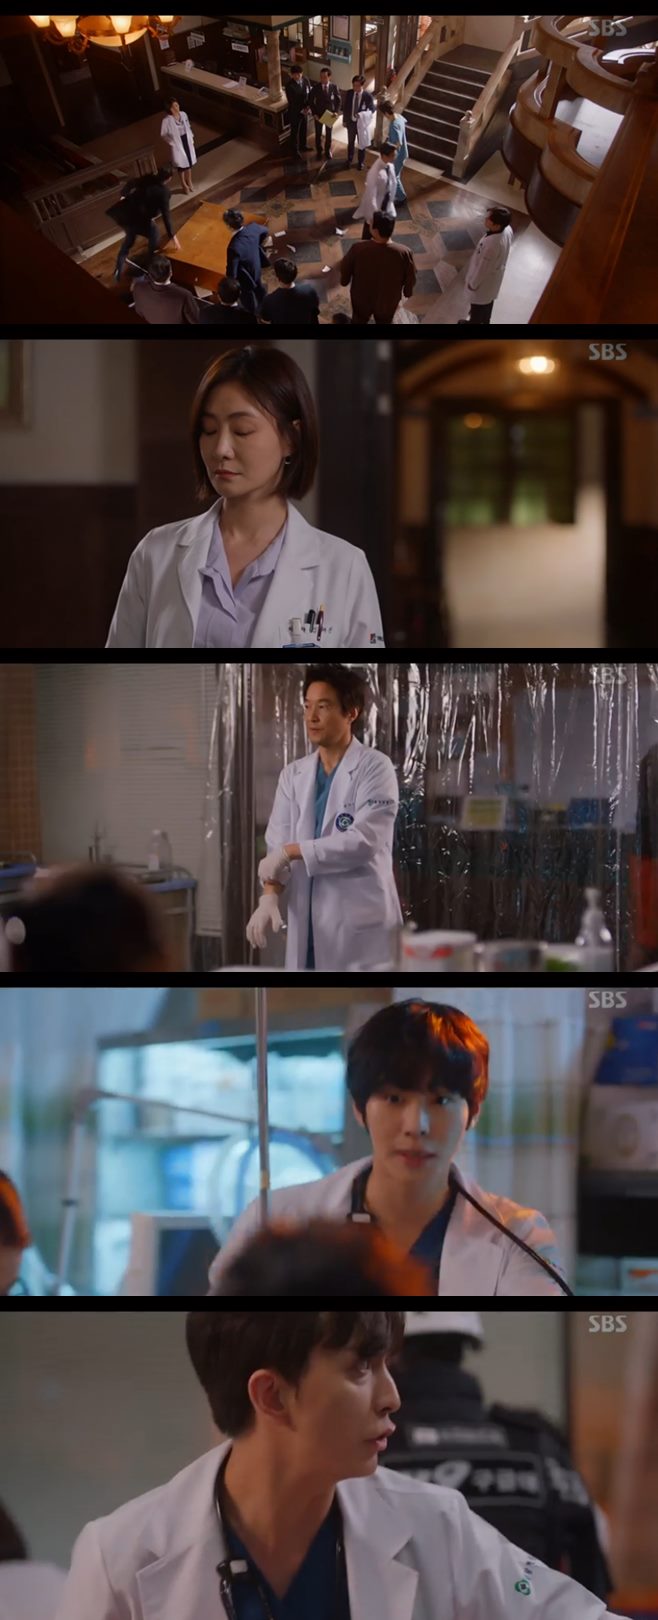 The operation for Han Suk-kyu Carpal Disease Syndrome, a romantic doctor, was completed safely, and his illness was suggested to be multiple sclerosis.The disciples Ahn Hyo-seop and Lee Sung-kyung Love Line also led to the happy endings.In particular, Drama has raised the satisfaction of existing fans by foreshadowing the romantic doctor Kim Sabu 3, which will meet the expectations of viewers.In the 16th episode of SBSs drama Romantic Doctor Kim Sabu 2 (directed by Kang Eun-kyung), which aired on the night of the 25th, the 16th episode of the last episode of the drama, includes Doldam Hospital, medical Physician, Han Suk-kyu, Seo Woo-jin (Ahn Hyo-seop), Cha Eun-jae (Lee Sung-kyung), Park Min-guk (Kim Joo-heon), Bae Moon-jung (Shin Dong-wook), Im Yoon-ah (So Ju-yeon), Jung In-soo (Yoon Na-pa), Yeo Un-yeong (Kim Hong-pa), Oh Myung-sim (Jin-kyung), Jang Gi-tae (Jin-kyung), Nam Do-il (Byeon Woo-min), Park Eun-tak (Kim Min-jae), Yang Ho-joon (Ko Sang-ho), Shim Hye-jin (Park Hyo-ju), Heo Young-gyu (Bae Myung-jin), Do Yun-wan (Cho Choi Jin-ho), Joo Young-mi (Yoon Bo-ra), Kang Ik-jun (Ke) Son Sang-yeon), Do In-beoms medical Kahaani ending, Happy Endings were drawn.Many situations were arranged around Kim Sabu on the day, and Park Min-guk, who lost Kang Ik-jun, who had suffered from WPW syndrome (WPW syndrome, early excitement syndrome), to the table death, was preparing for his resignation.But Kim was acknowledging Park Min-guks ability to be the same Physician. Kim was also a Physician versus Physician, who gave his own advice to Park Min-guk.Park Min-guk was eventually supposed to have not given up on Physician until the end of the surgery for an anterior anterior hypertrophy who suddenly entered Doldam Hospital.Kim Sabu expressed his encouragement to Cha Eun-jae, who has grown rapidly in terms of his skills and personality, and expressed his desire to become a good Physician in the future.Above all, Kim Sabu recognized Seo Woo-jin, who has grown his skills and has suffered more than anyone else at Doldam Hospital, as his disciple.Kim Sabu has been in contact with many patients at Doldam Hospital and has written down records of experience, which is left with vast medical data.Kim had a major process to live as a Physician in the future, solving the wrist and carpal syndrome that had been suffering from surgery.The surgery suggested his condition was multiple sclerosis (multiple sclerosis); Bae Moon-jung, Seo Woo-jin, and others entered the operation and the operation ended safely.The interesting love line of Romantic Doctor Kim Sabu 2 also ended with Happy Endings. Seo Woo-jin and Cha Eun-jae showed off their affection after confirming their love for each other.Im Yoon-ah and Park Eun-tak also promised a happy future by showing off their affection for each other and a good medical colleague.Kim Sabu sent a love call to Park Min-guk, who came out of the hospital, to work together.Kim had a unique human beauty, and Park Min-guk said, If I stay here, I will build a trauma center in three years. Kim said, Can you handle it?We will run the hospital as an independent corporation that is not related to the university hospital, and we will promise viewers the possibility of Season 3, Kim said.Romantic Doctor Kim Sabu 2 started with the support of existing fans due to the hot popularity of Romantic Doctor Kim Sabu 1 last season.Still, Speedy Medical Kahaanis development, following last season, many characters appeared as existing characters and showed off their unchanging characteristics.Nurse Park Eun-tak, Oh Myung-shim, and Namdo-il were still strong members of Doldam Hospital.Above all, the spiritual landlord and leader of Doldam Hospital, Kim Sabus brilliant presence, was still a key factor in shining season 2.In fact, Drama introduced the will of Chairman Shin Myung-ho of Season 1, and promoted Doldam Hospital, not Geo University Hospital, to an independent corporation.This was a sign that predicted the infinite Physician life and the upbringing of disciples of Kahaani, a permanent stone hospital, and Kim Sabu, a romantic doctor.As long as Kim Sabu and Actor Han Suk-kyu are present, the foundation of all Kahaani variations of Romantic Doctor Kim Sabu 3 is fully established.Currently, portal sites have appeared in search terms that demonstrate interest in actors such as Han Suk-kyu age, Lee Sung-kyung age and Lee Sung-kyung key.The solid hot rolling of many actors will also be the result of the light.Han Suk-kyu was born in 1964 and Lee Sung-kyung was born in 1990.Lee Sung-kyung is 173cm tall and is known as an tall woman actor because she is from the model.